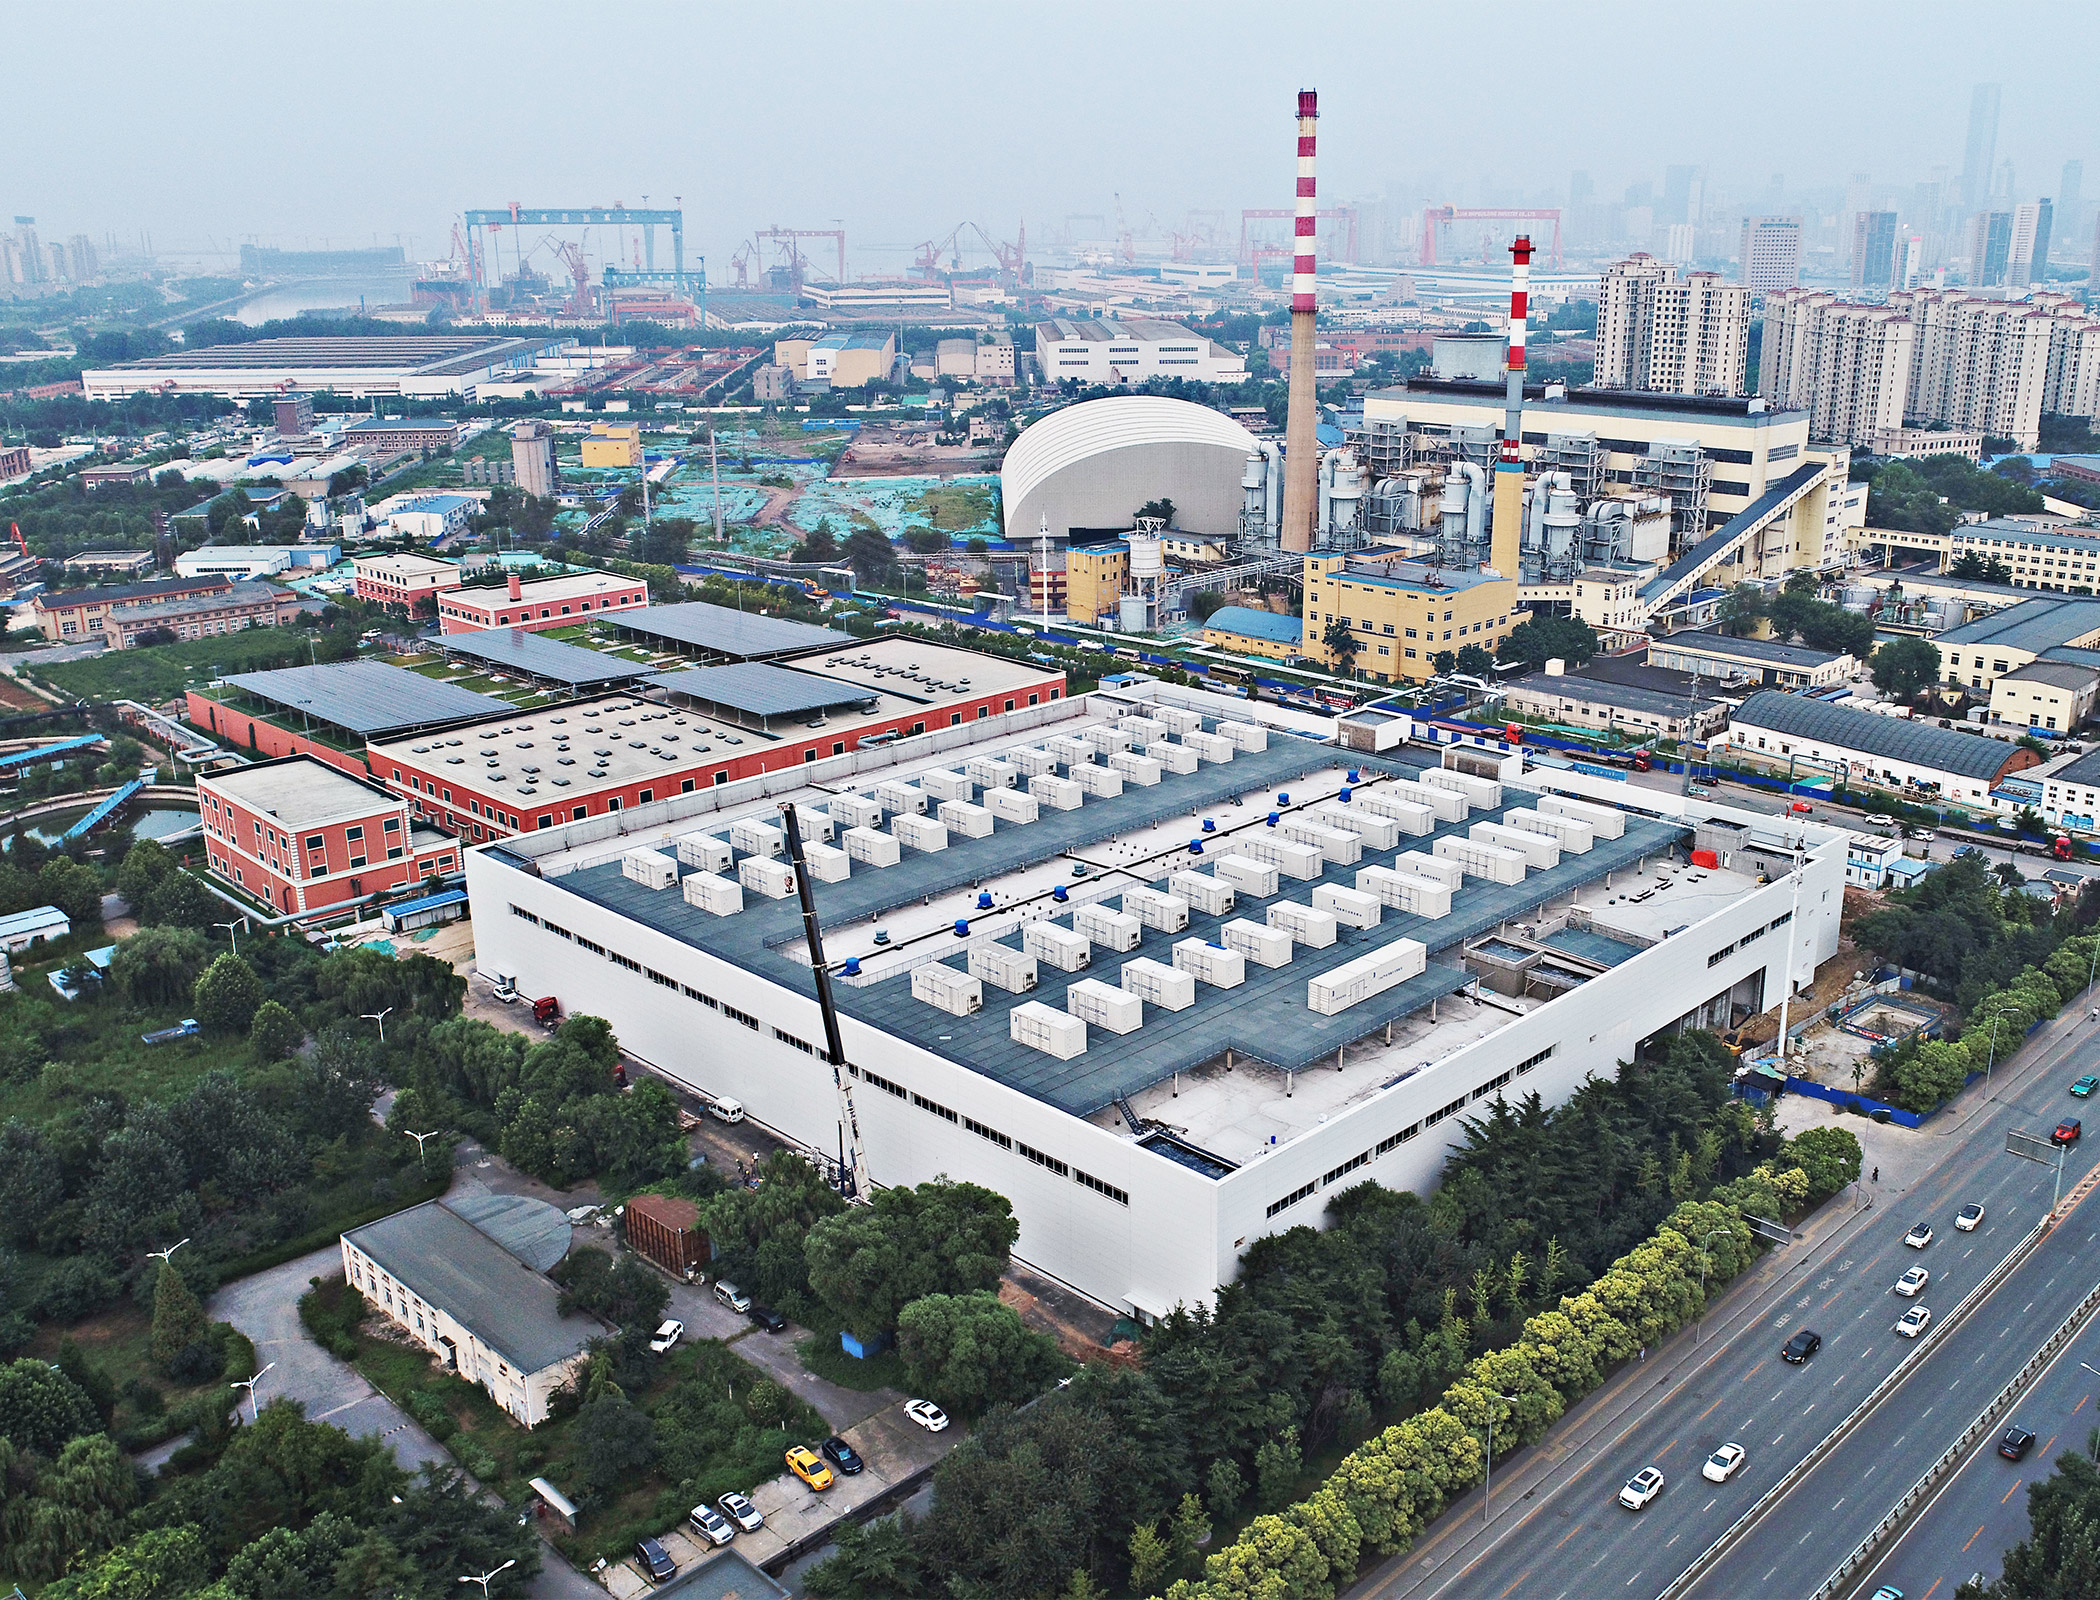 World's largest flow battery to offer grid-scale energy storage in China